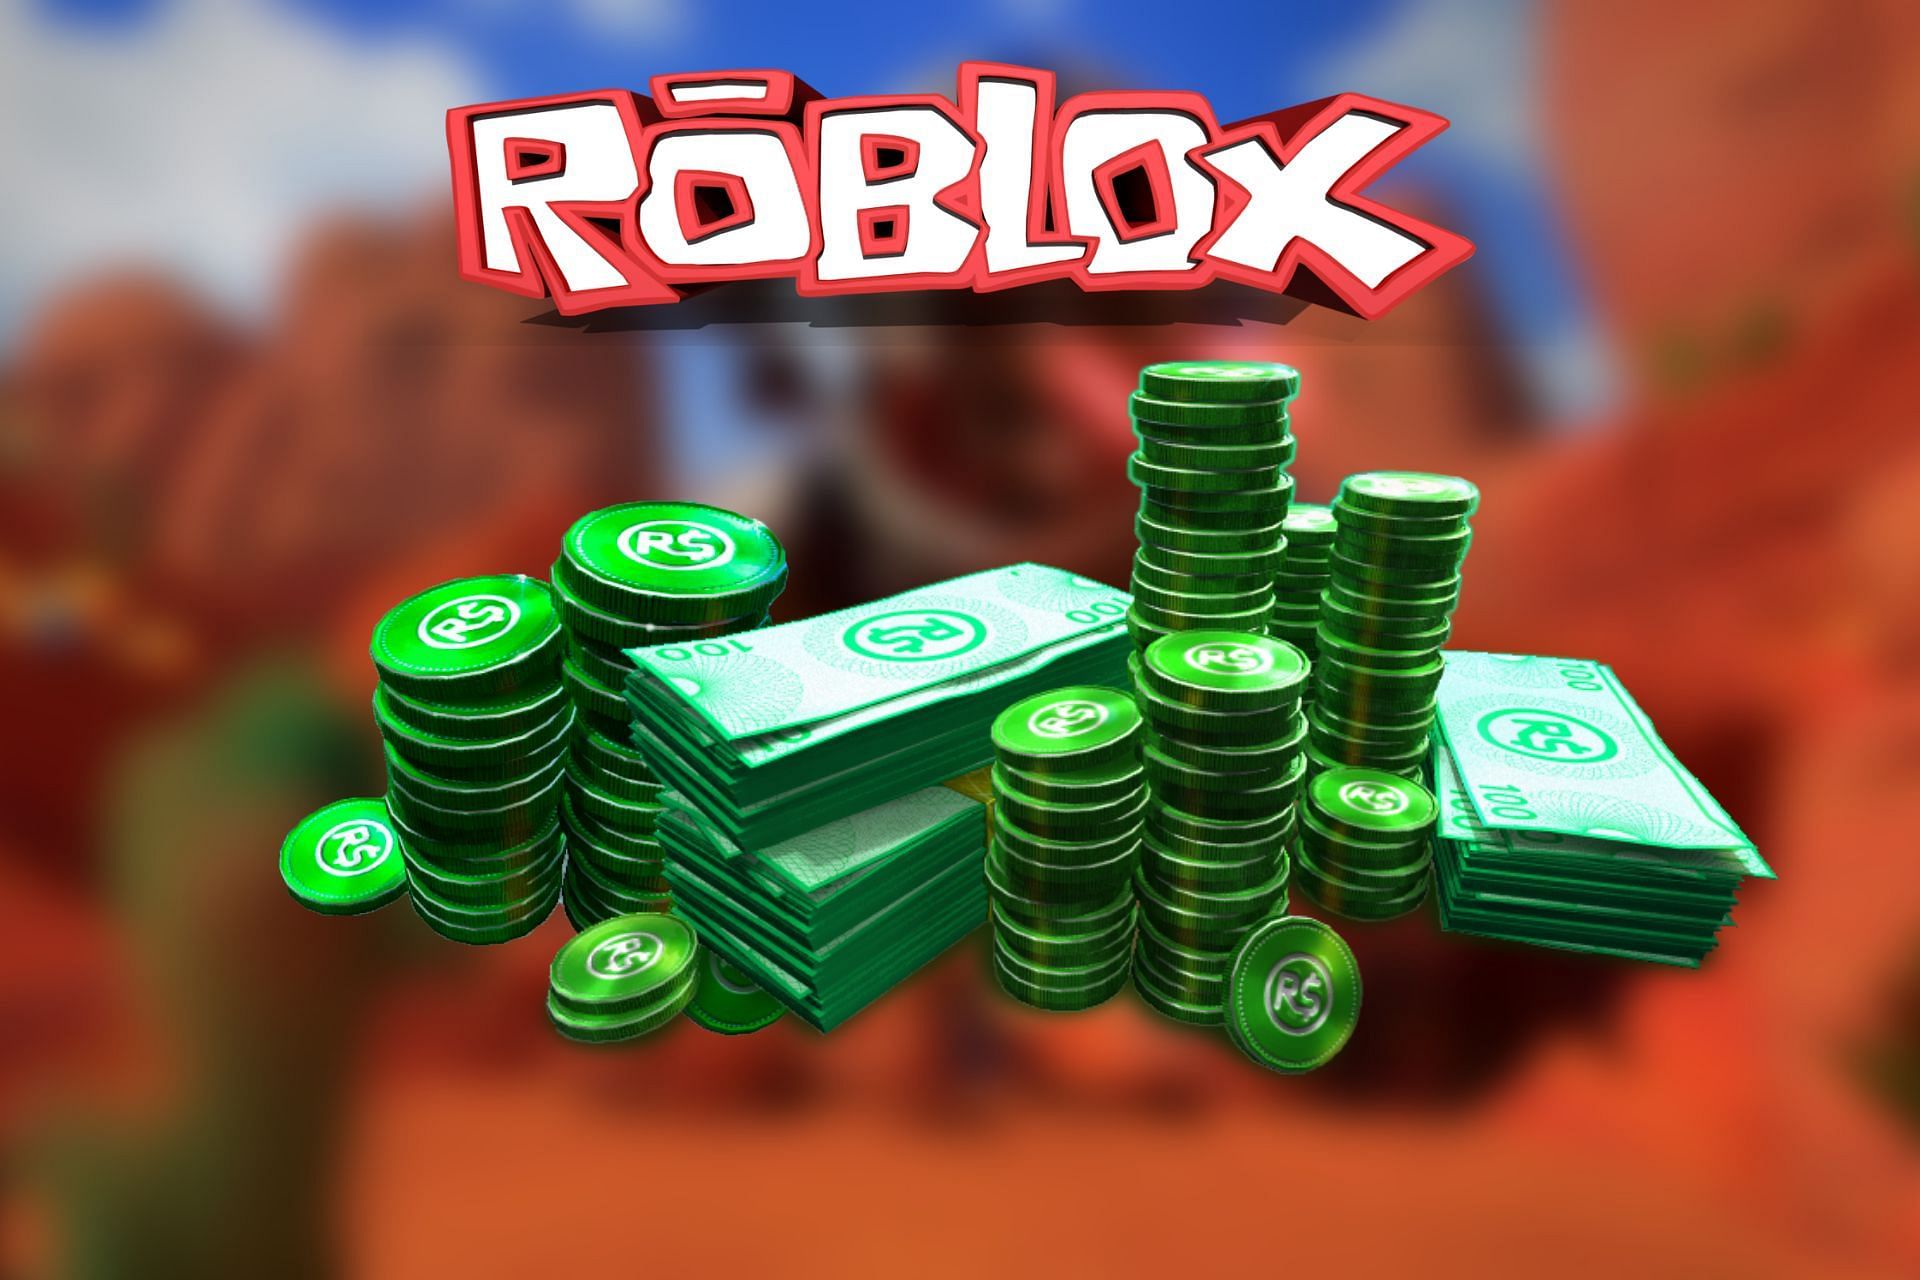 3 easy ways to get Robux in Roblox